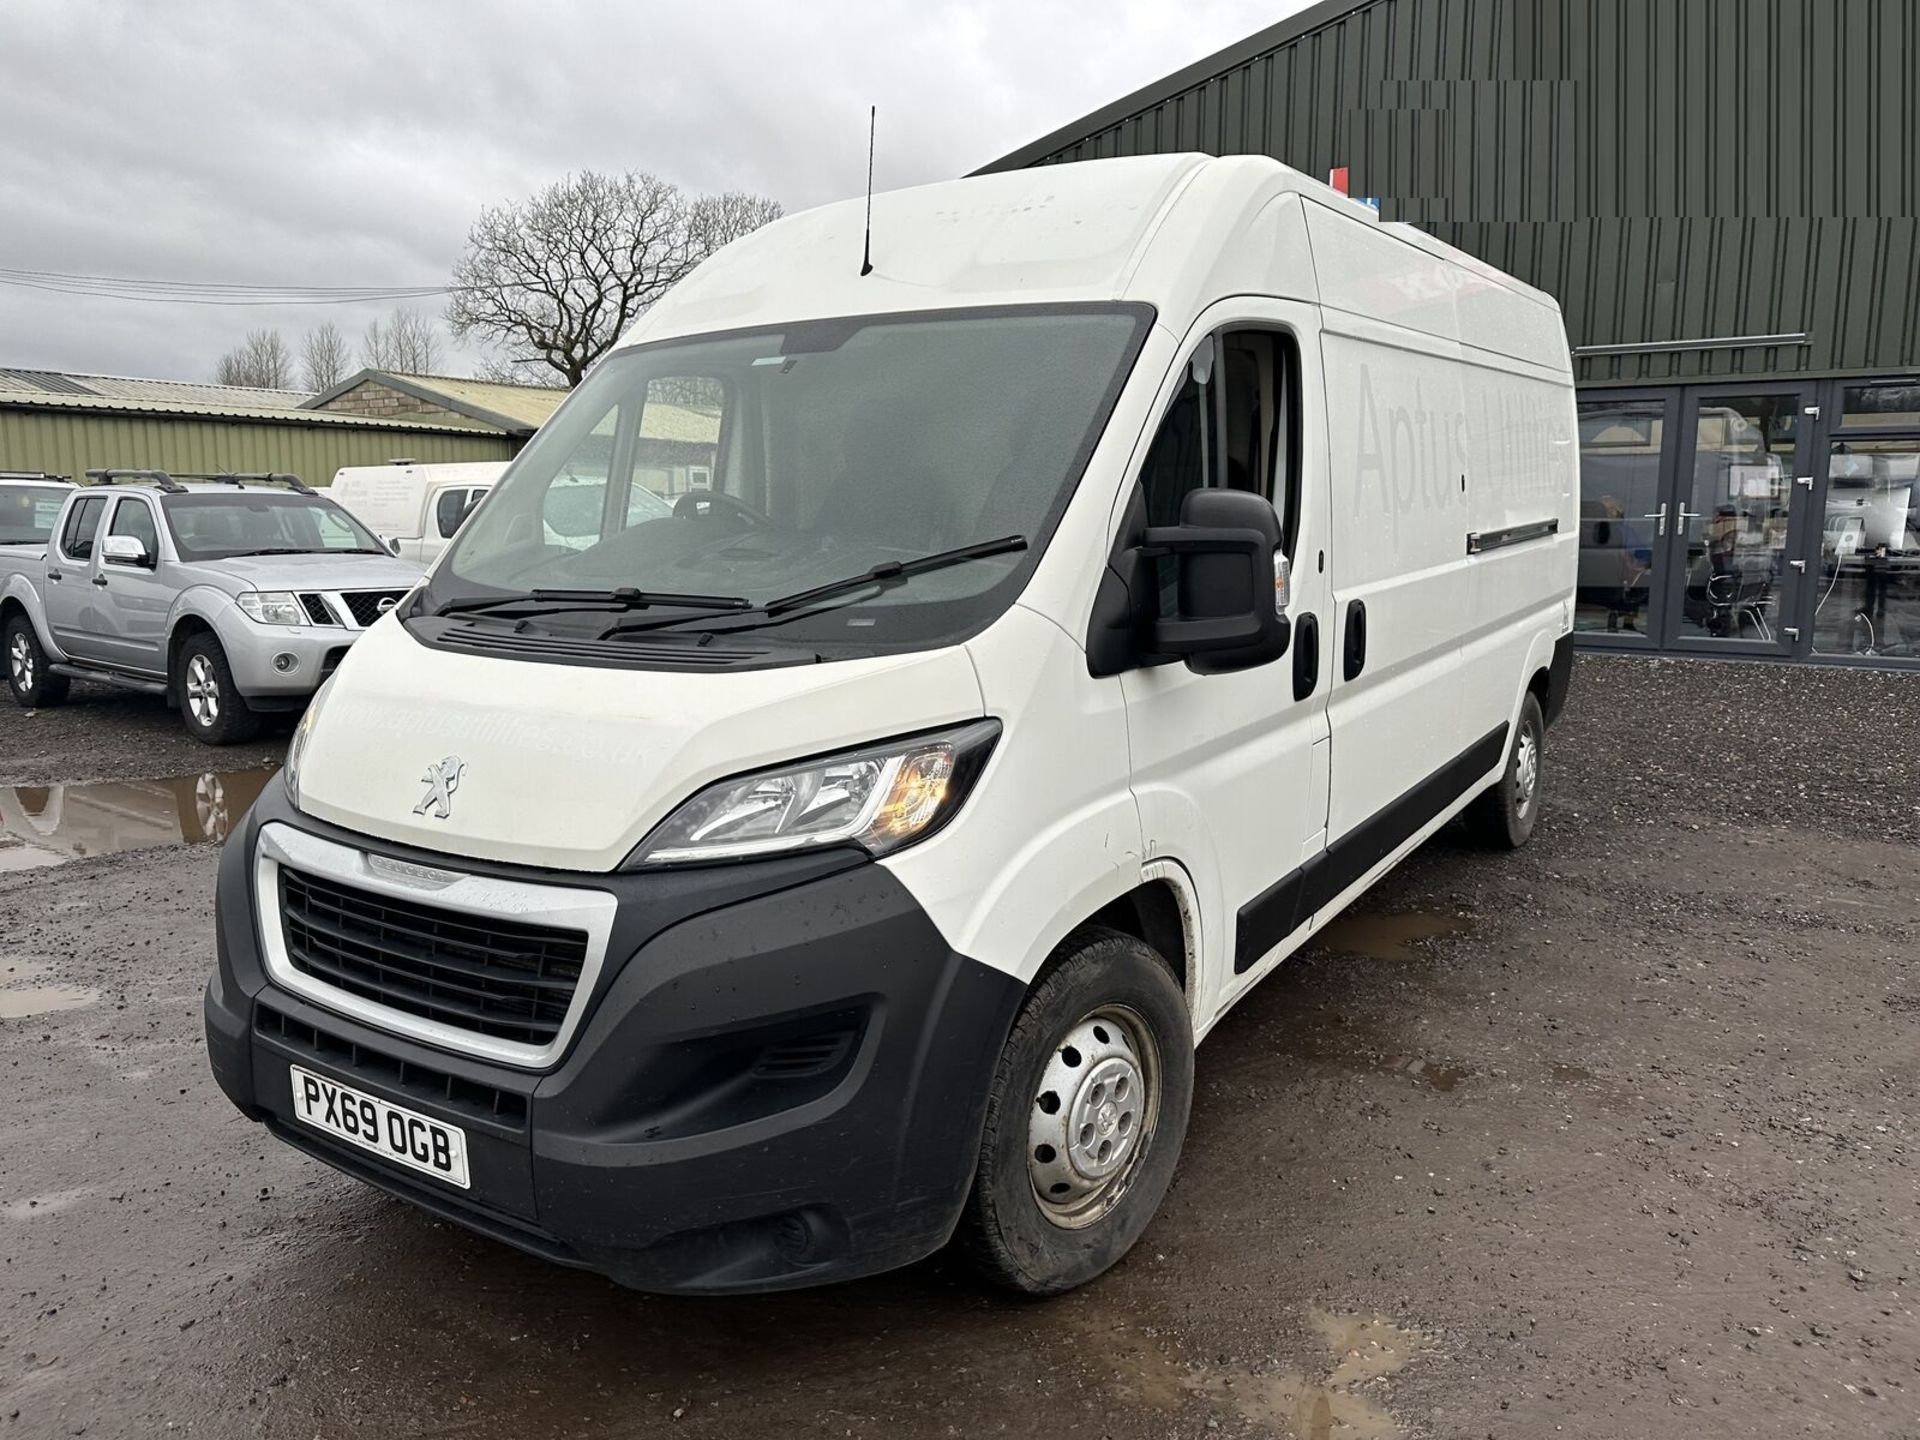 69 PLATE PEUGEOT BOXER: BLUE HDI POWER, READY FOR DUTY